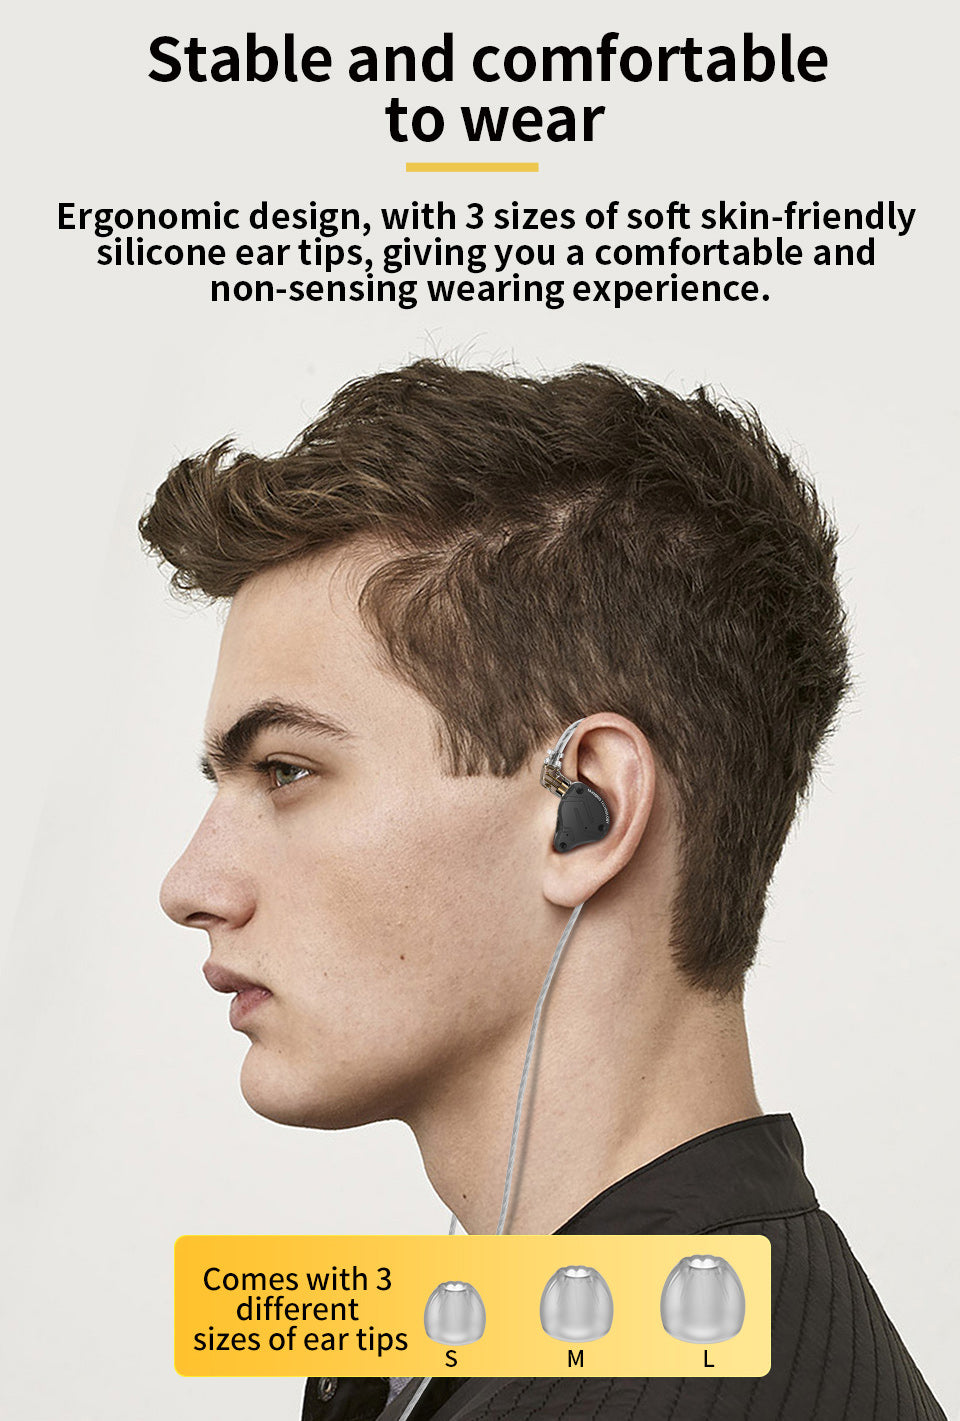 Stable and comfortable to wear Ergonomic design, with 3 sizes of soft skin-friendly silicone ear tips, giving you a comfortable and non-sensing wearing experience.